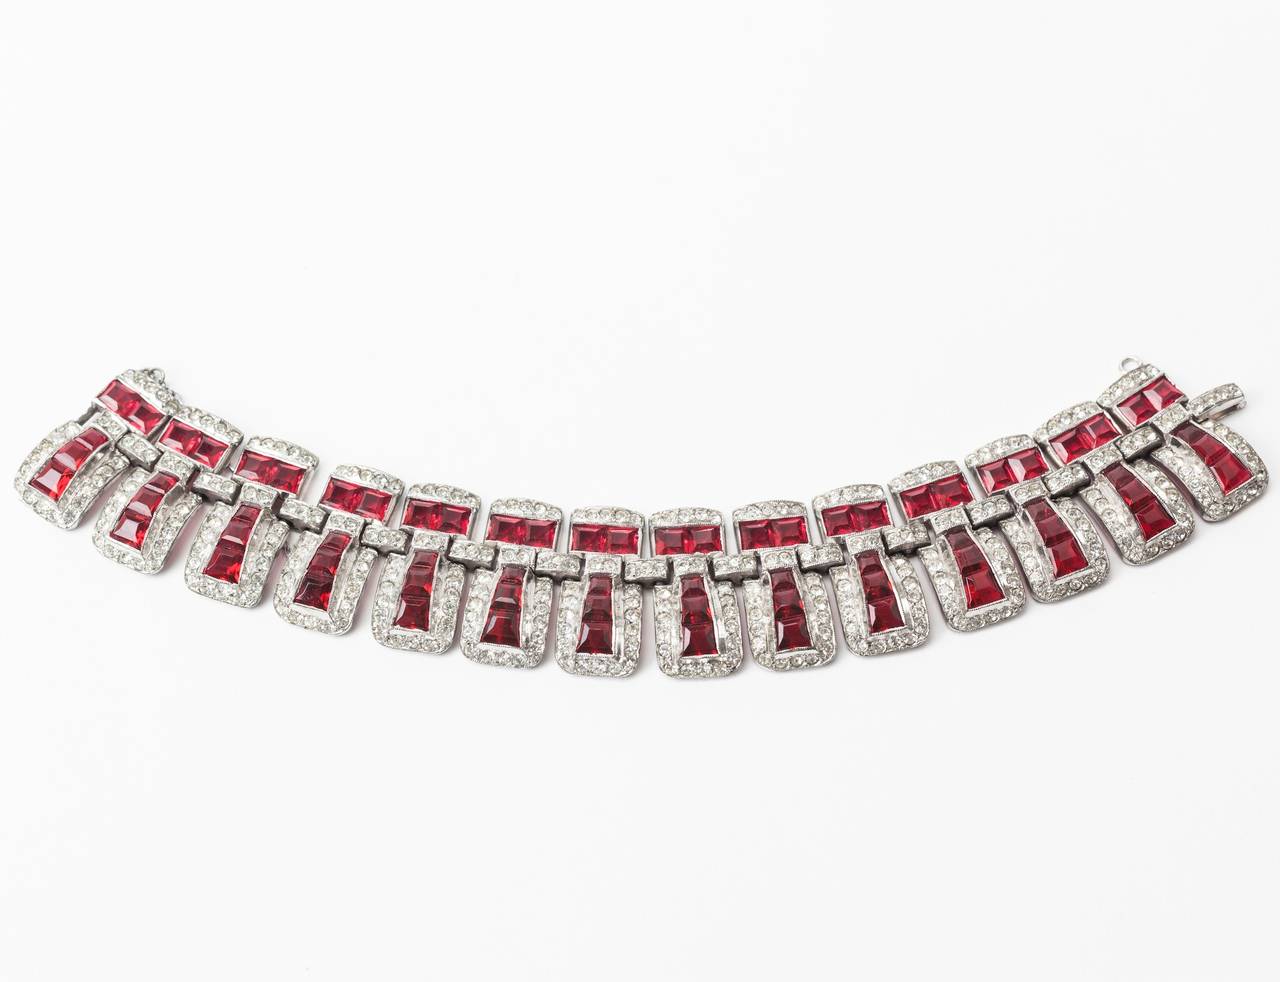 Articulated Art Deco Faux Ruby Bracelet In Excellent Condition For Sale In New York, NY